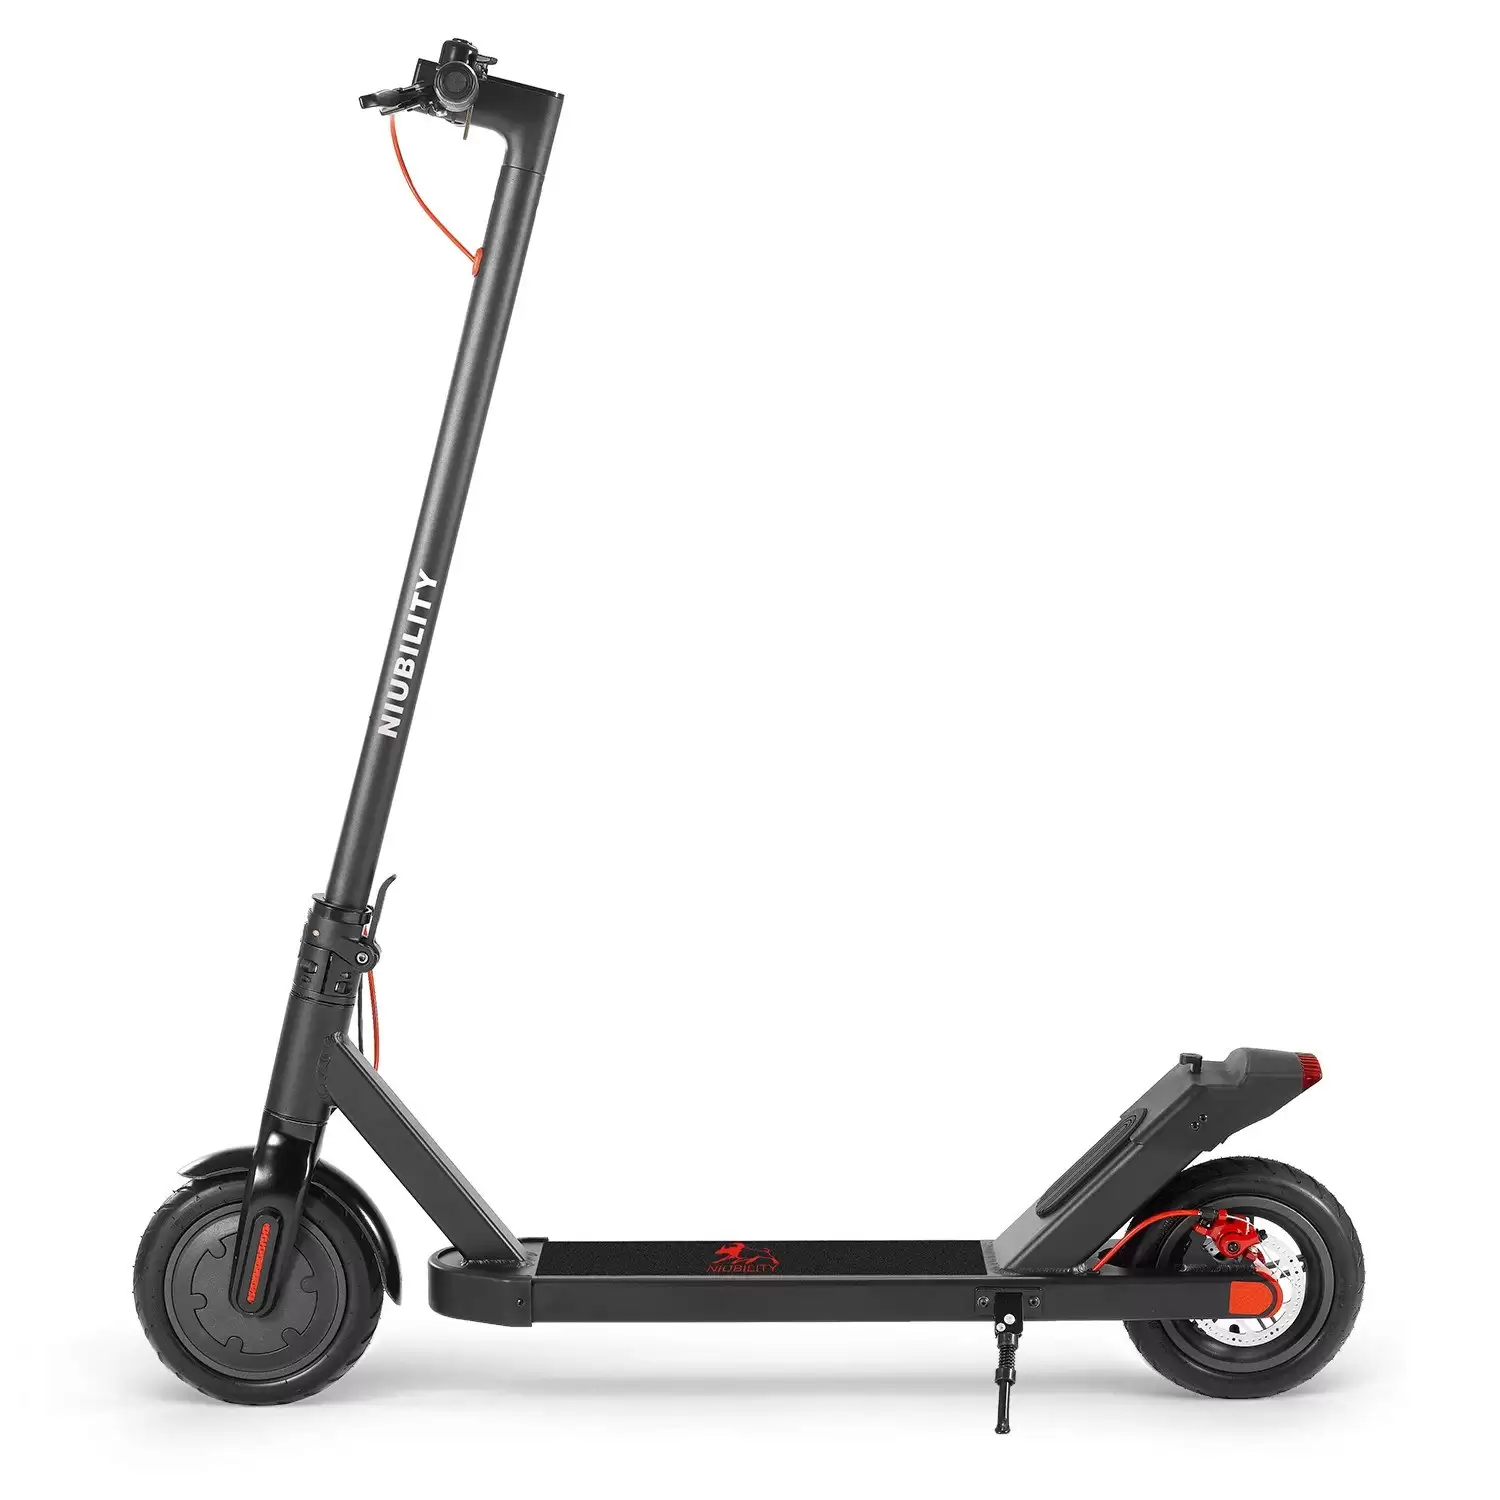 Order In Just $228.64 Niubility N1 8.5 Inch Two Wheel Folding Electric Scooter With This Discount Coupon At Tomtop